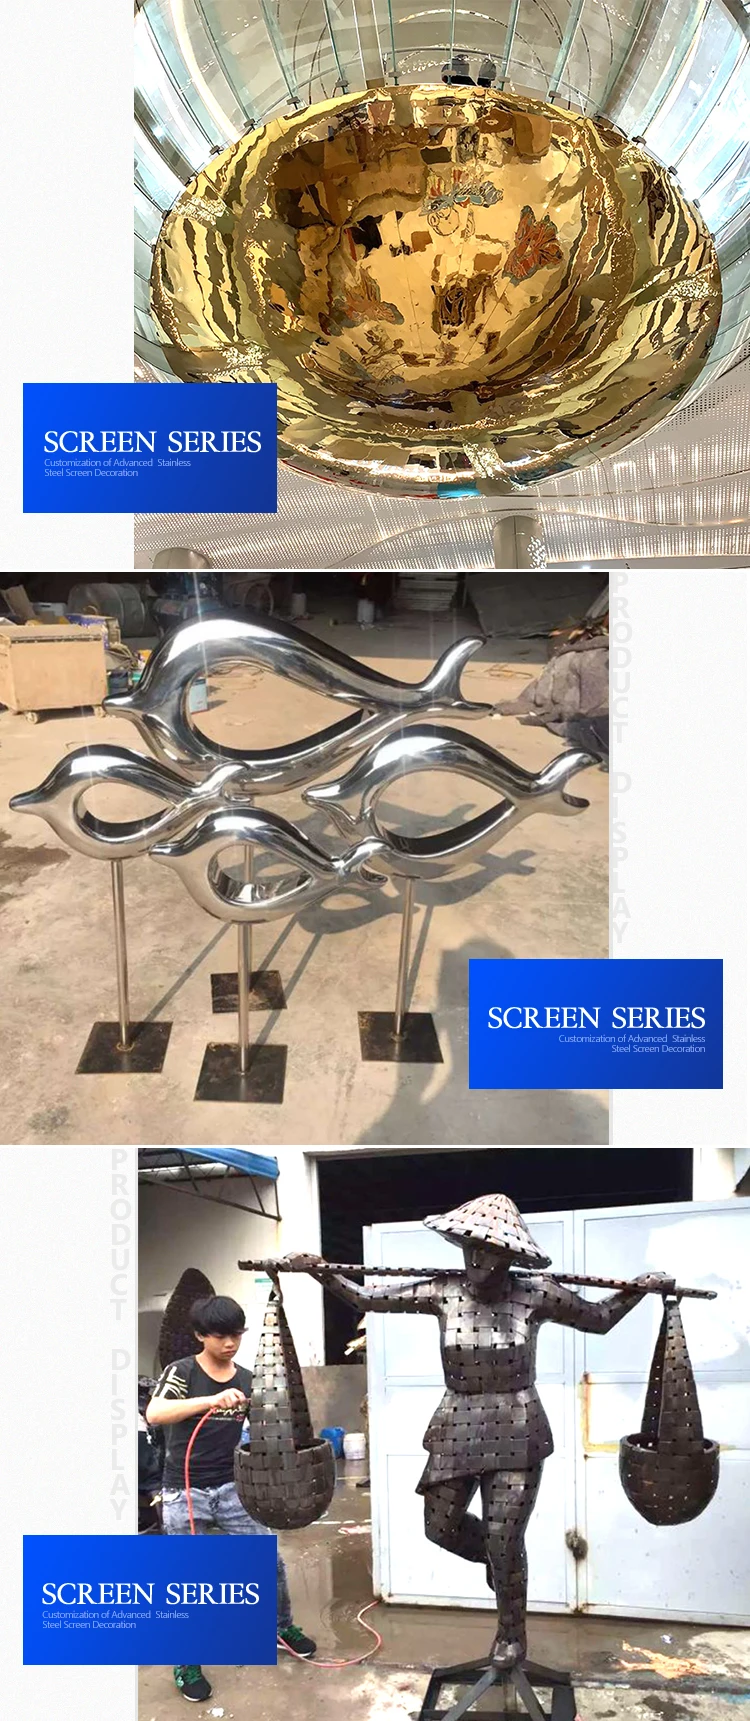 Silver Color Outdoor Stainless Steel Fish Sculpture for Sale Metal Art Decor Modern Abstract Stainless Steel Fish Sculpture